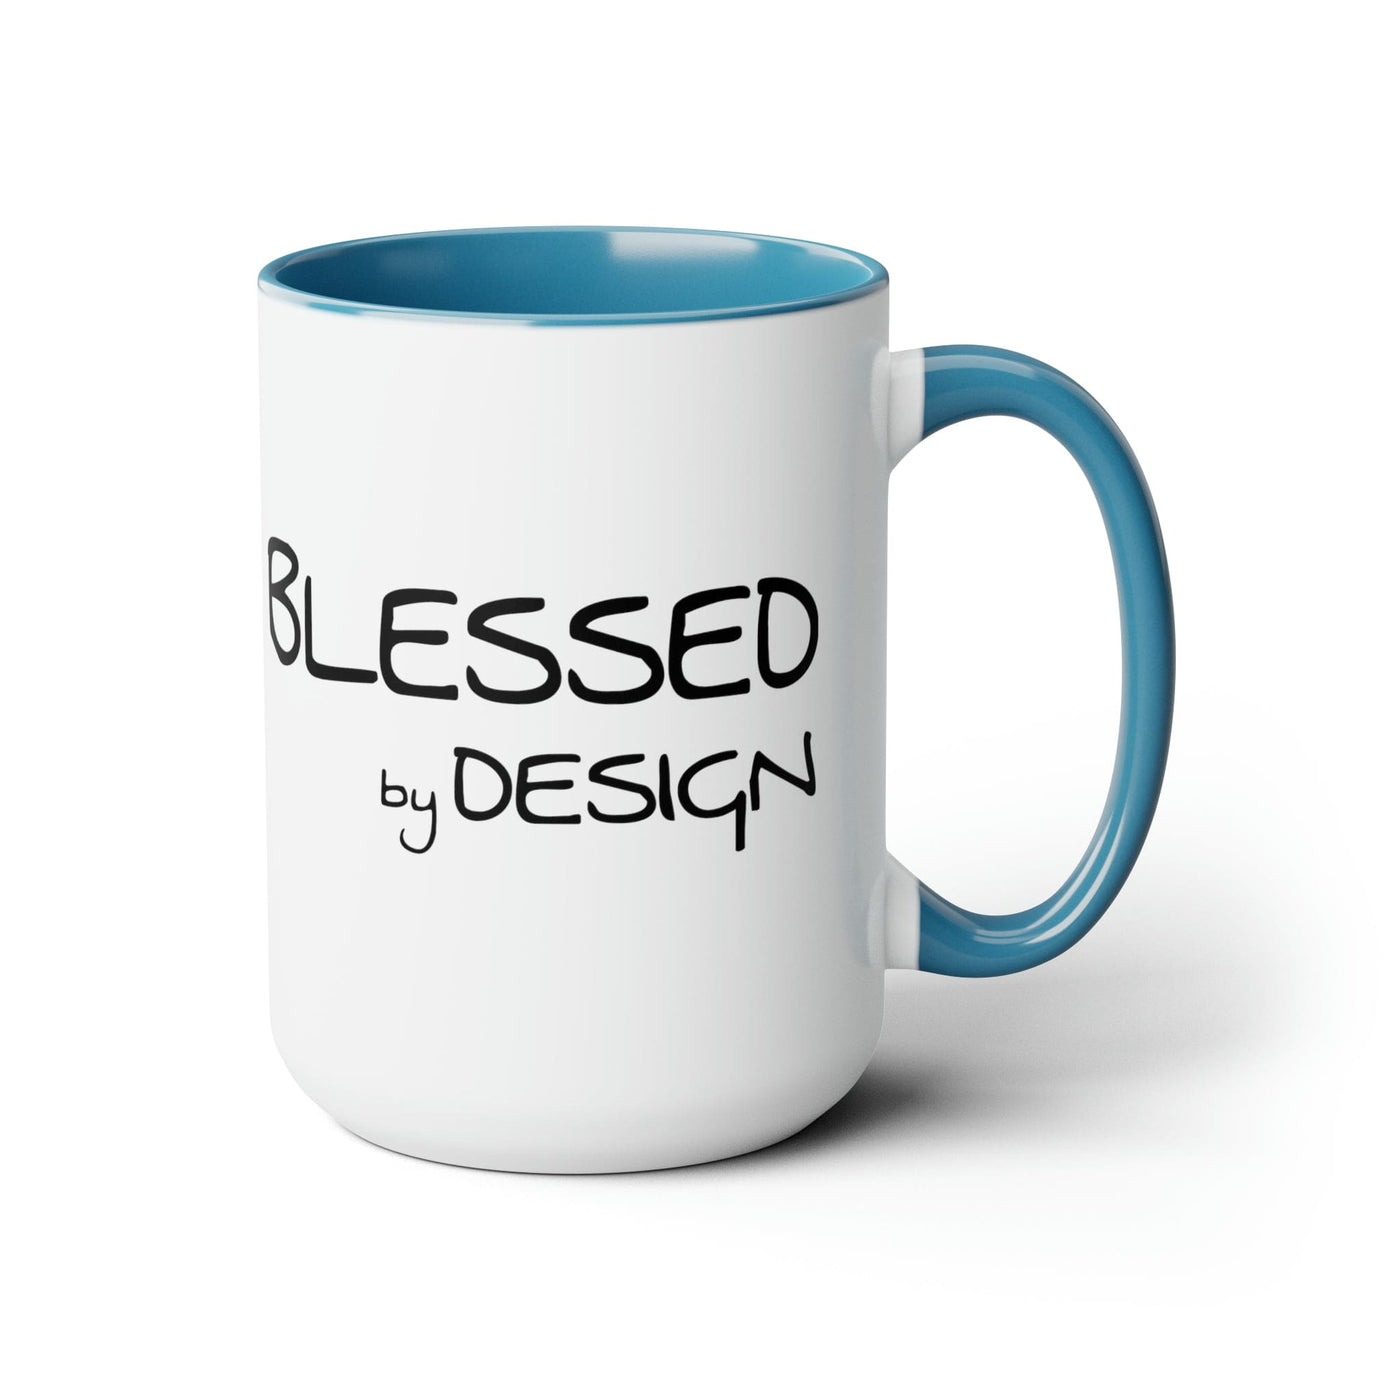 Accent Ceramic Coffee Mug 15oz - Blessed By Design - Inspirational Affirmation -